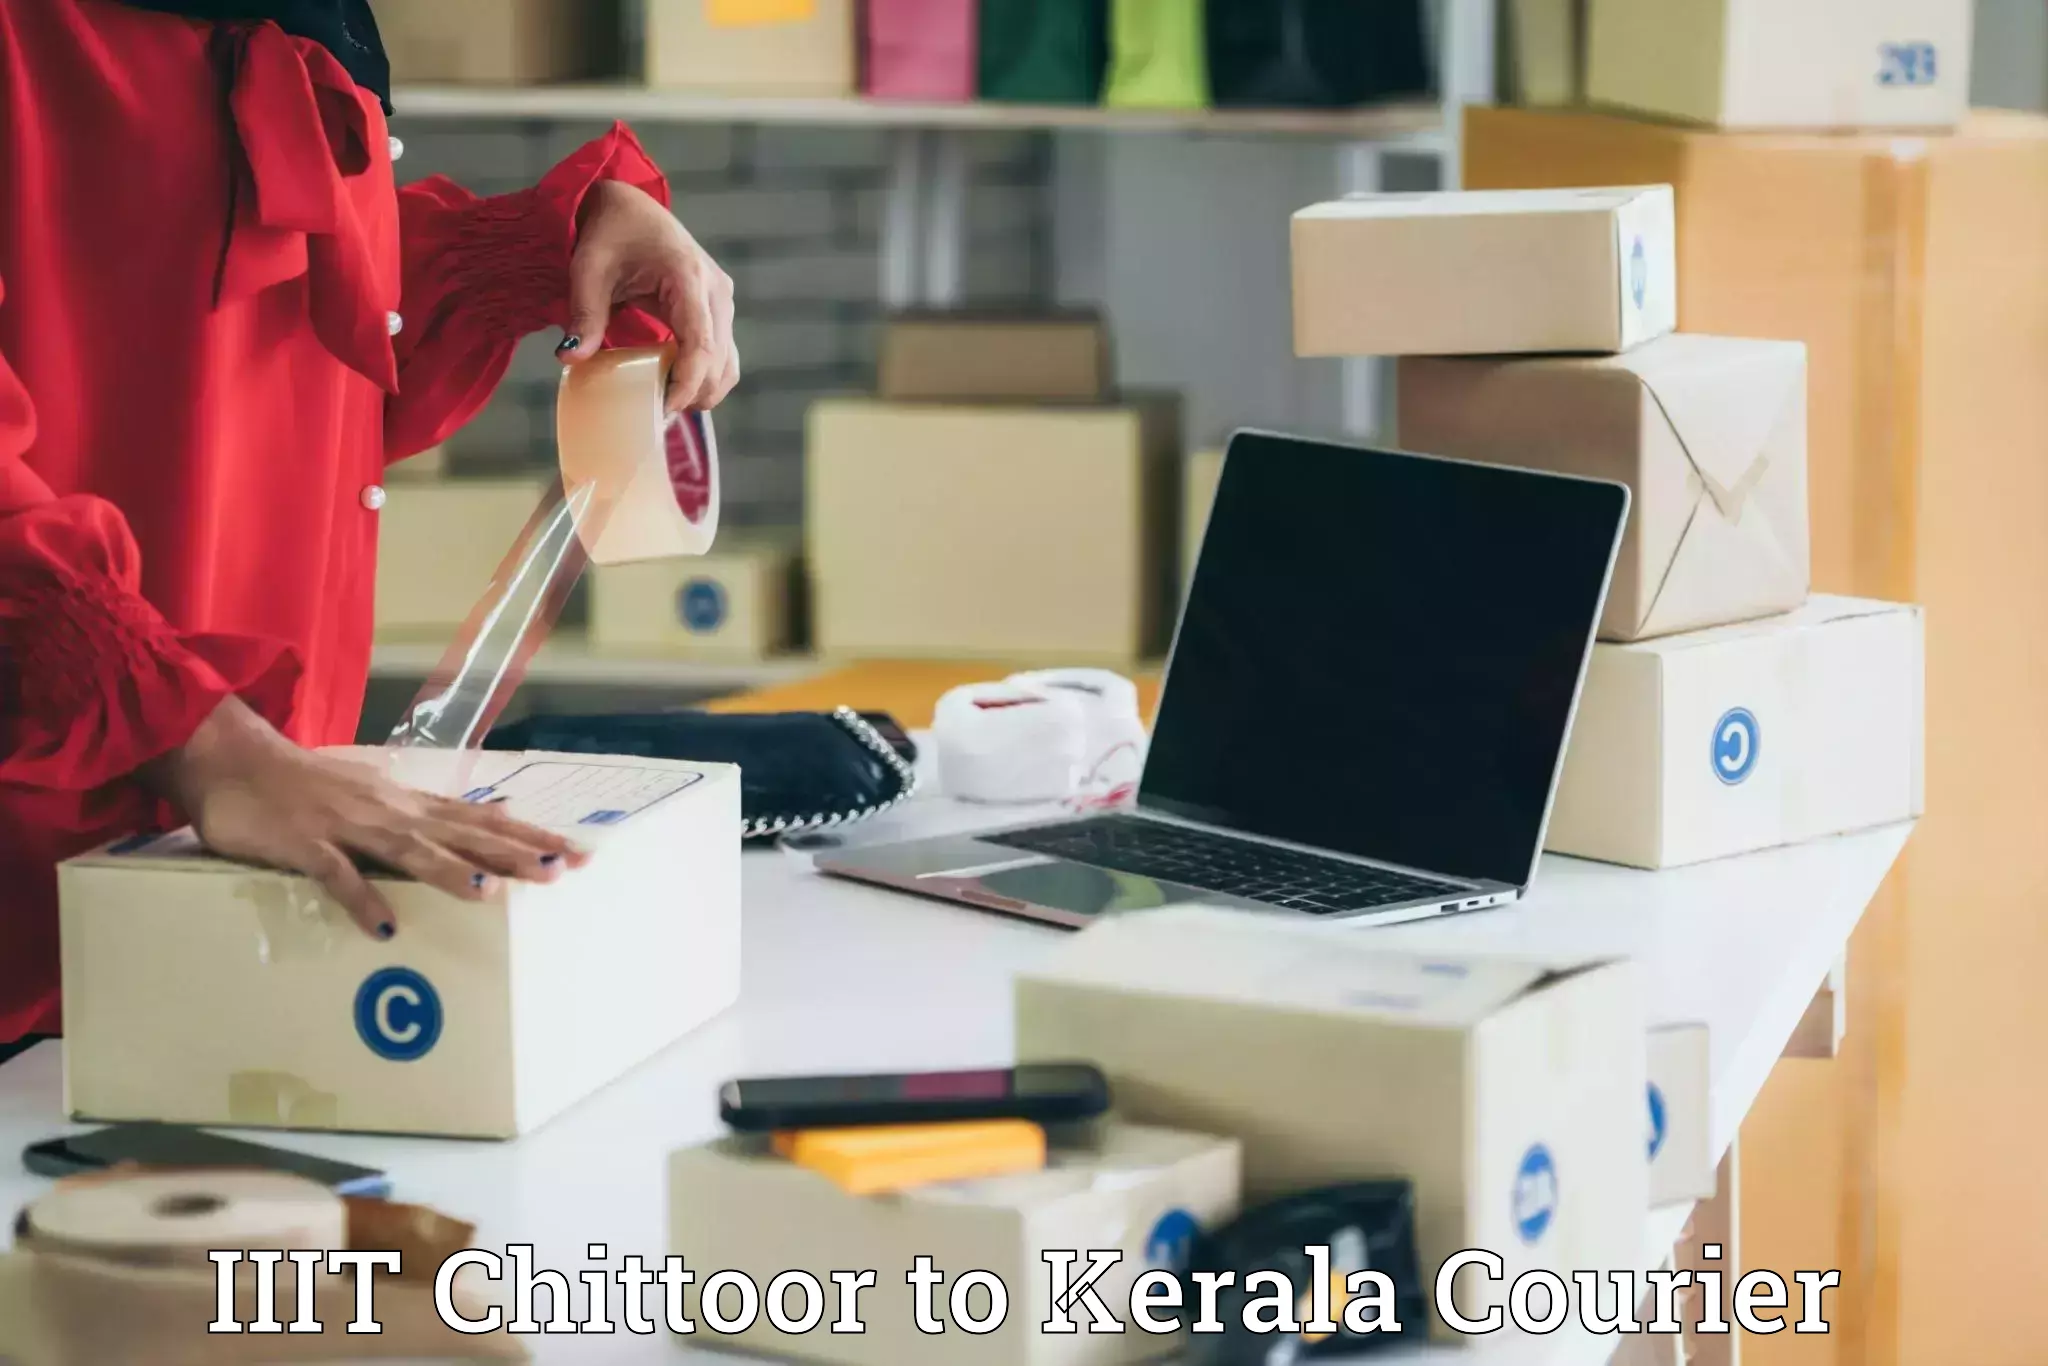 Innovative logistics solutions in IIIT Chittoor to Kerala